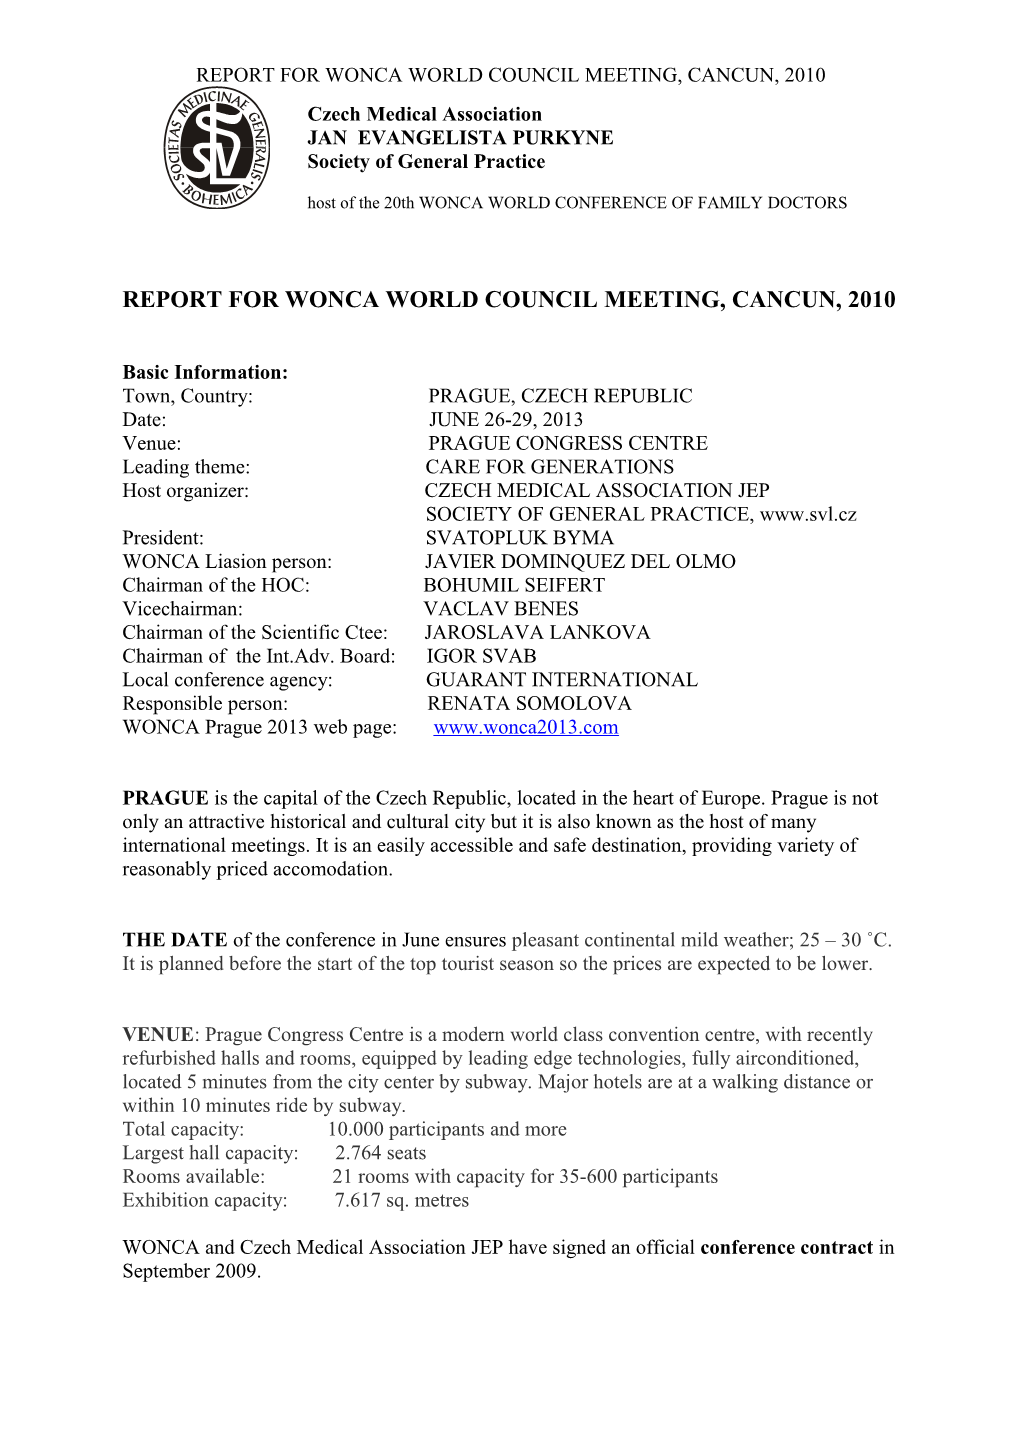 Report for Wonca World Council Meeting, Cancun, 2010